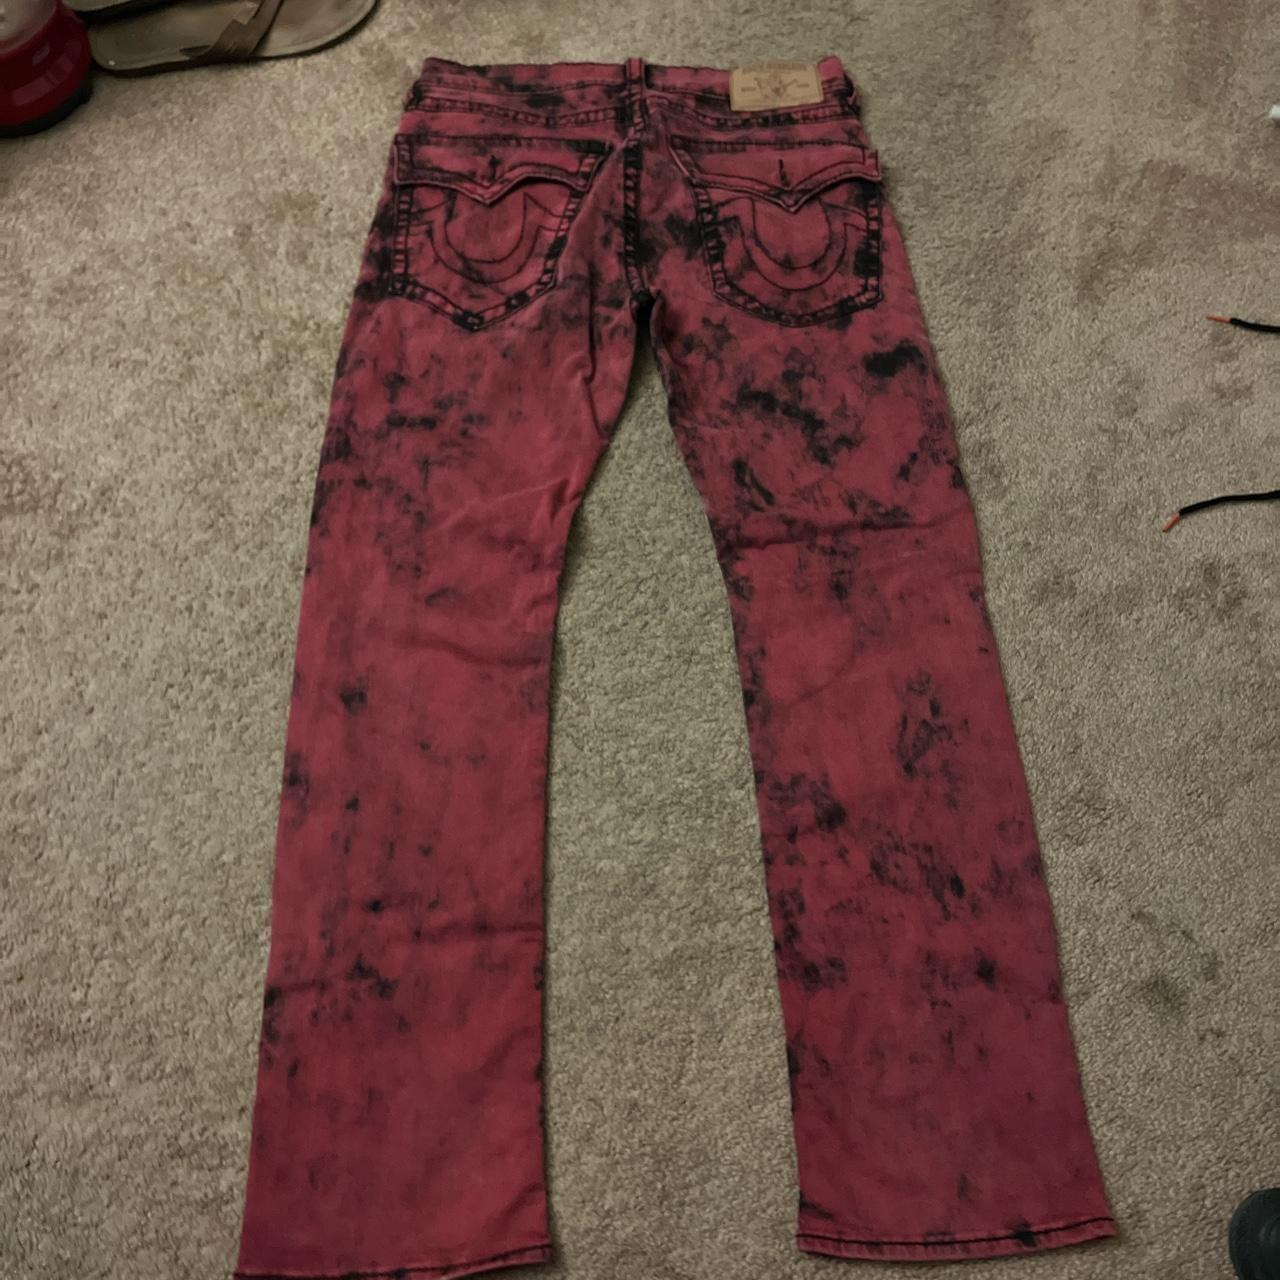 CRAZY TRUE RELIGION BLOOD RED JEANS STRAIGHT FIT - Depop